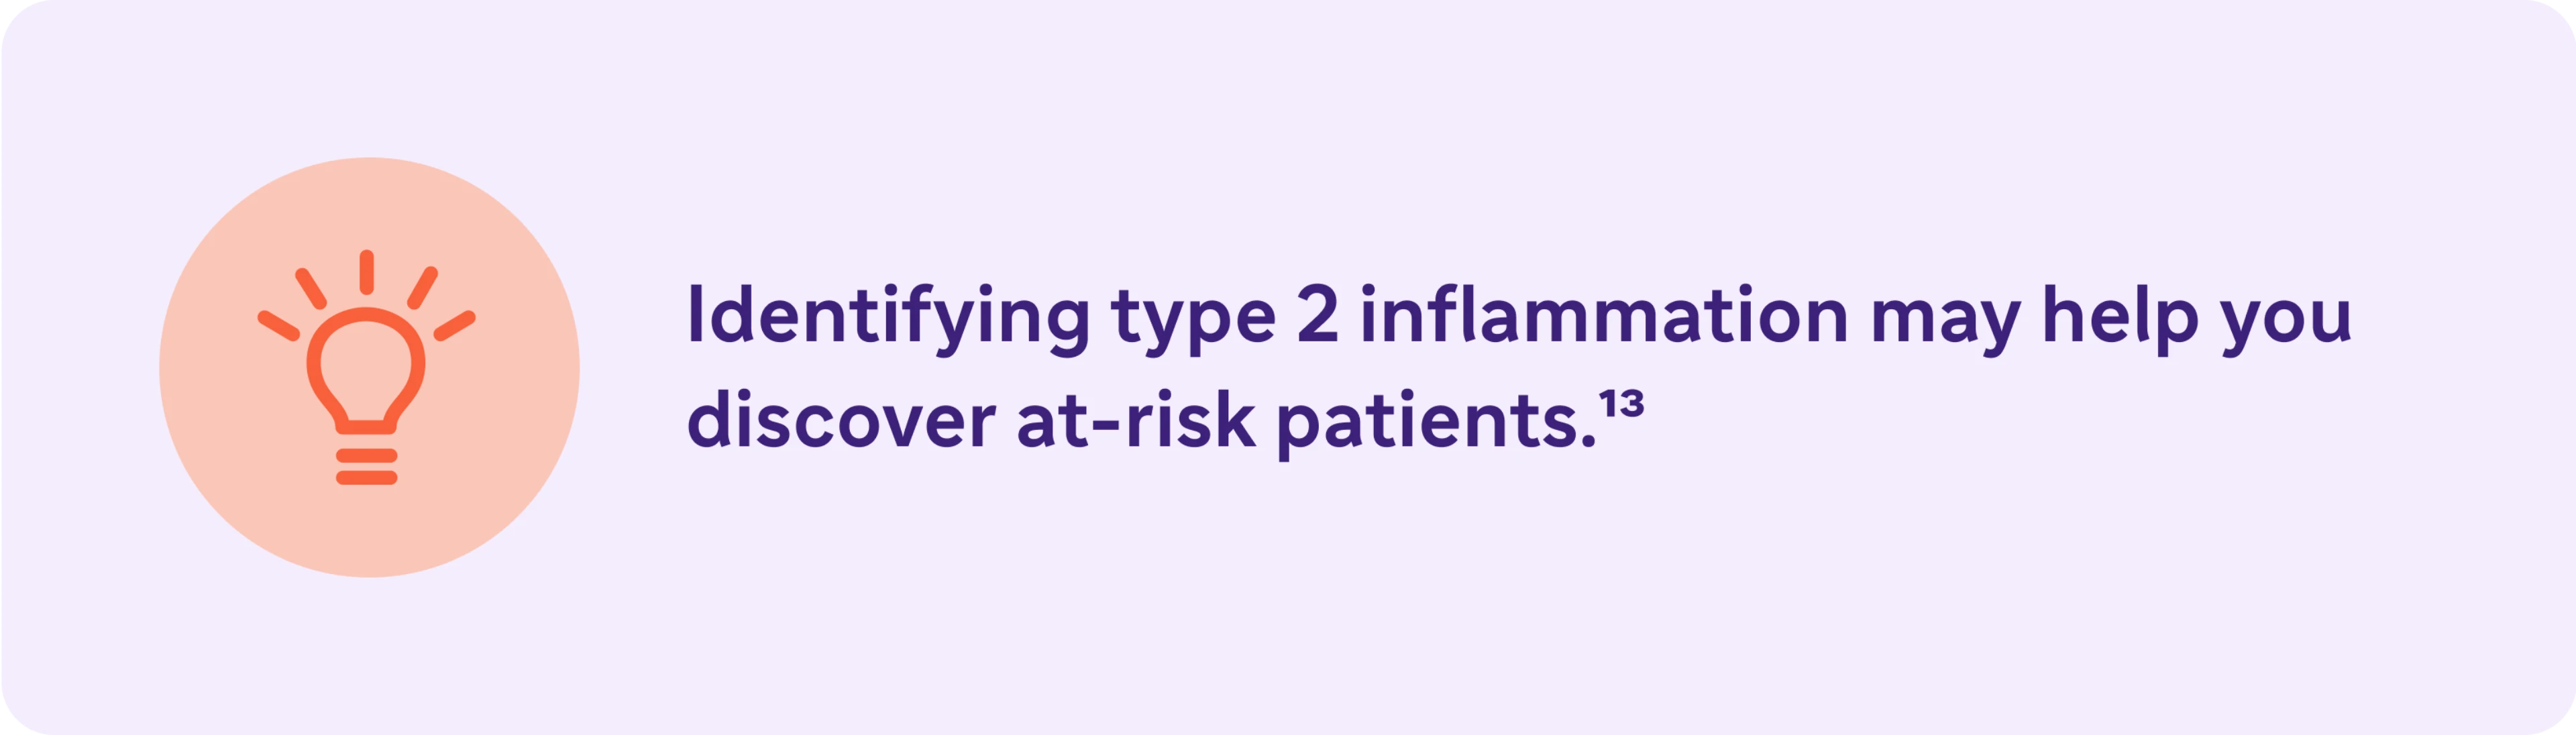 Identifying type 2 inflammation may help you discover at-risk patients.